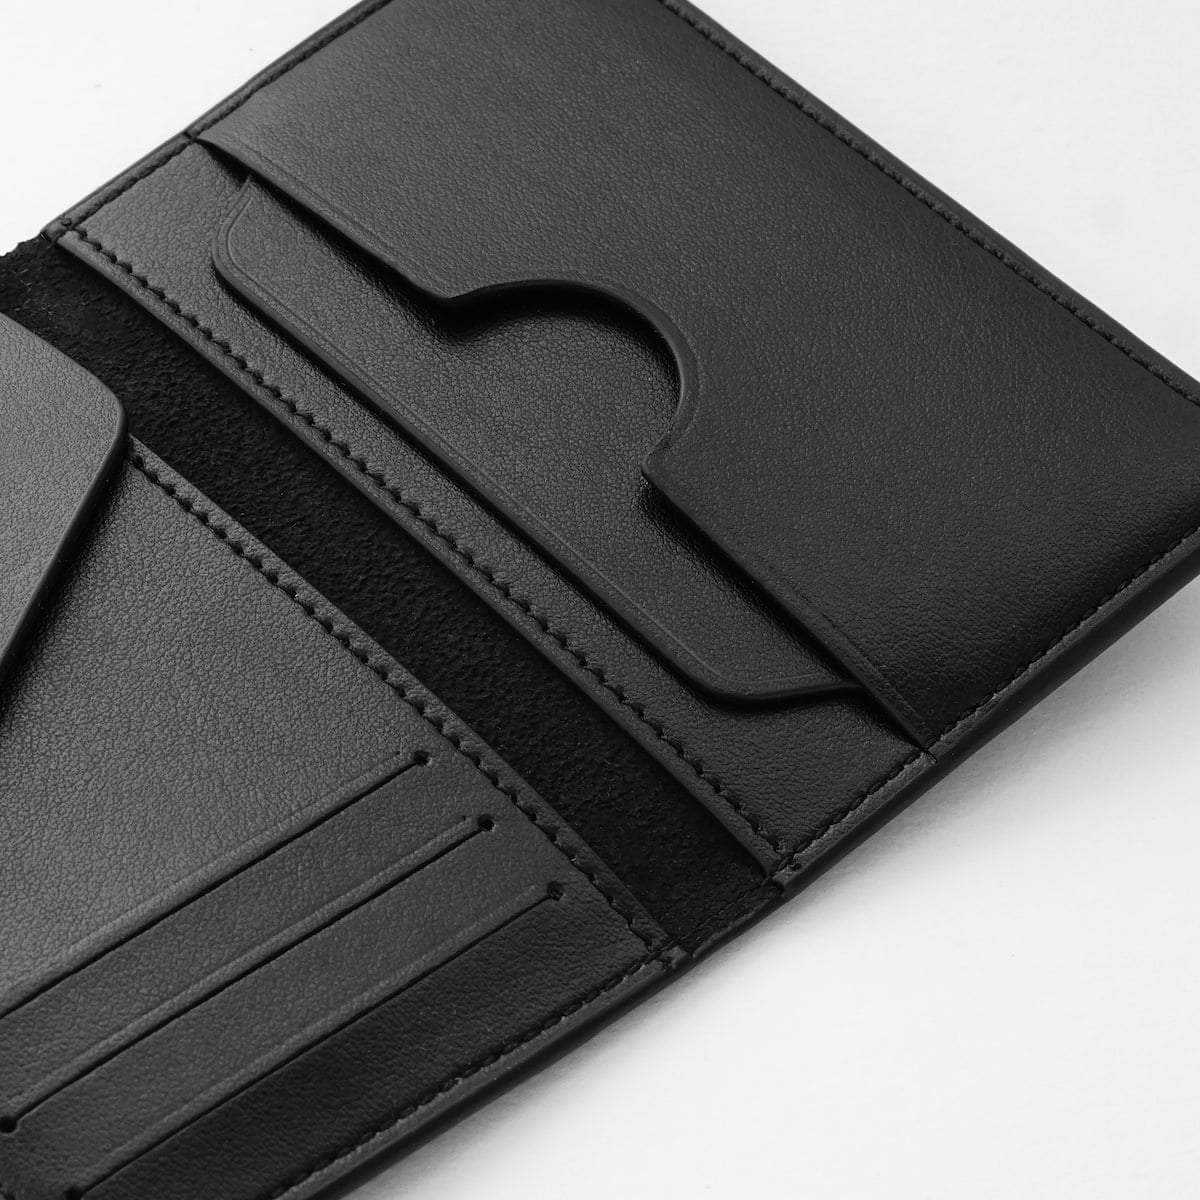 Compact Wallet | Premium Apple Skin | Oliver Co. London